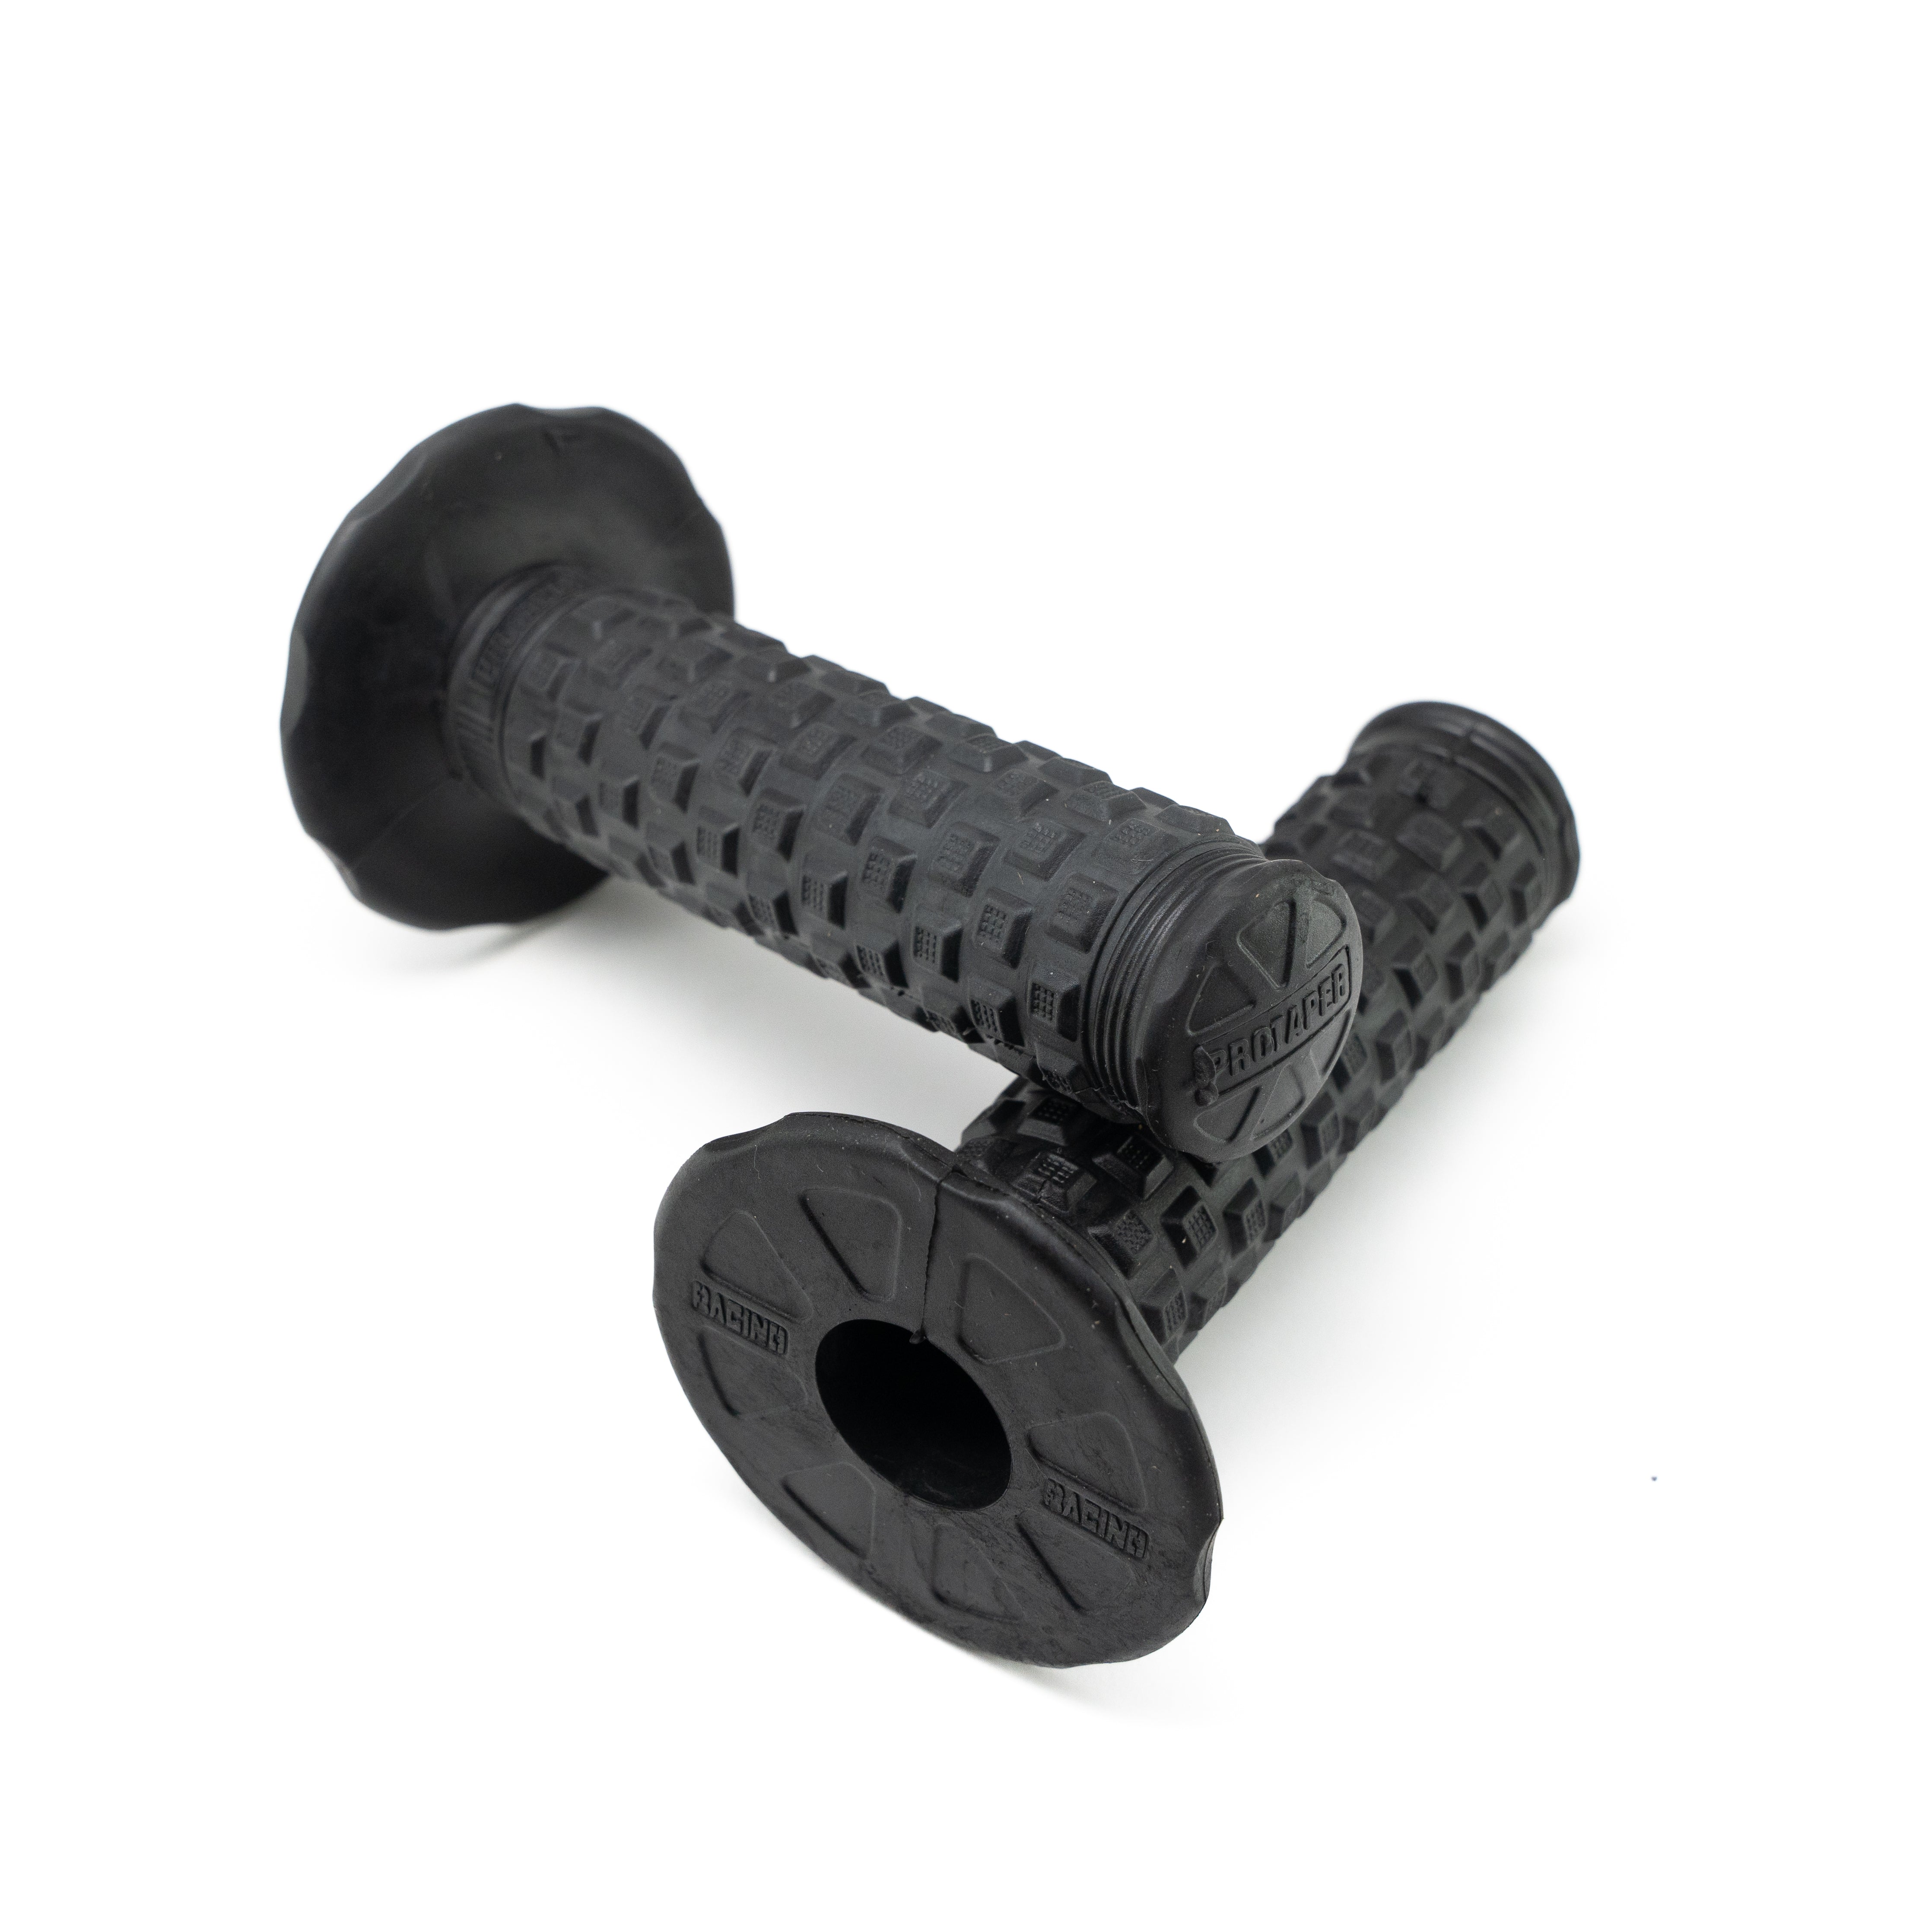 7/8" Motorcycle Grips